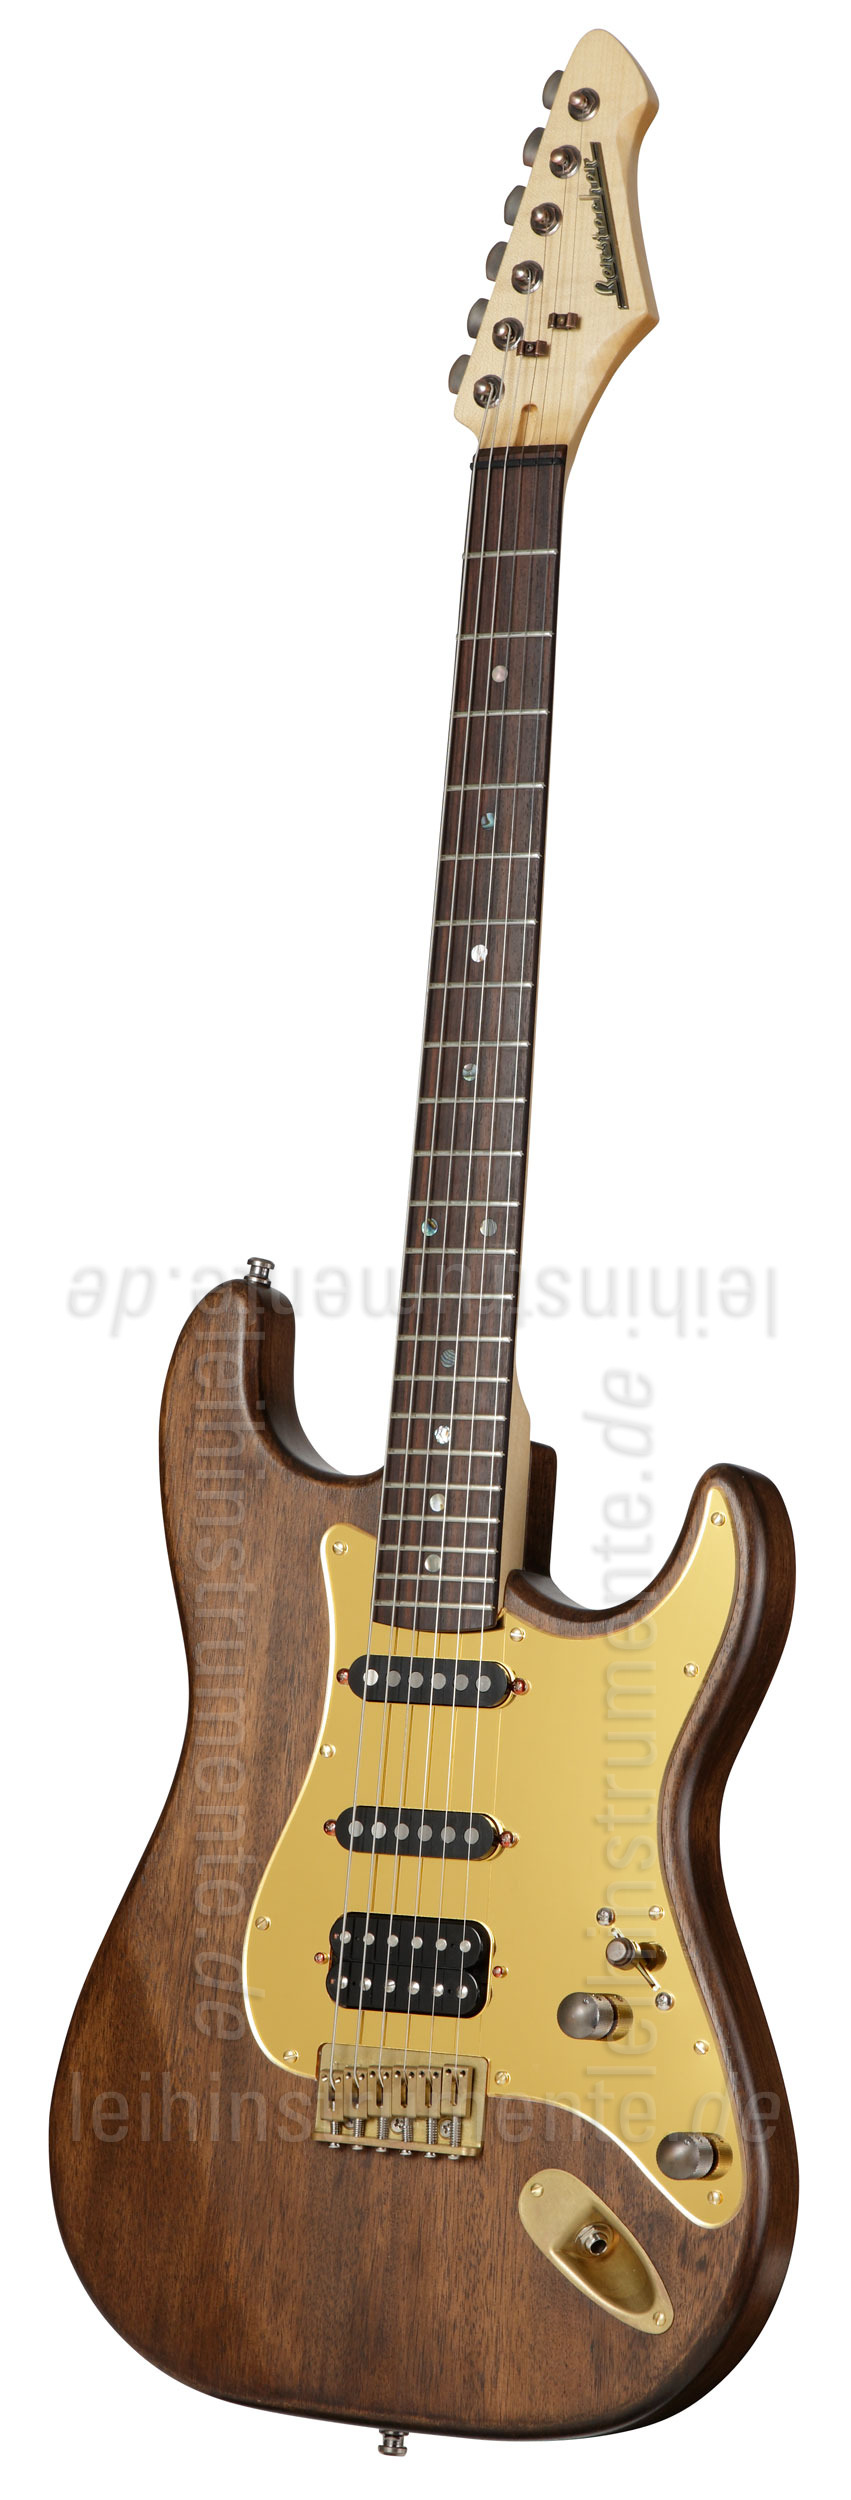 to article description / price Electric Guitar BERSTECHER Old Whisky Deluxe Gold + hard case - made in Germany